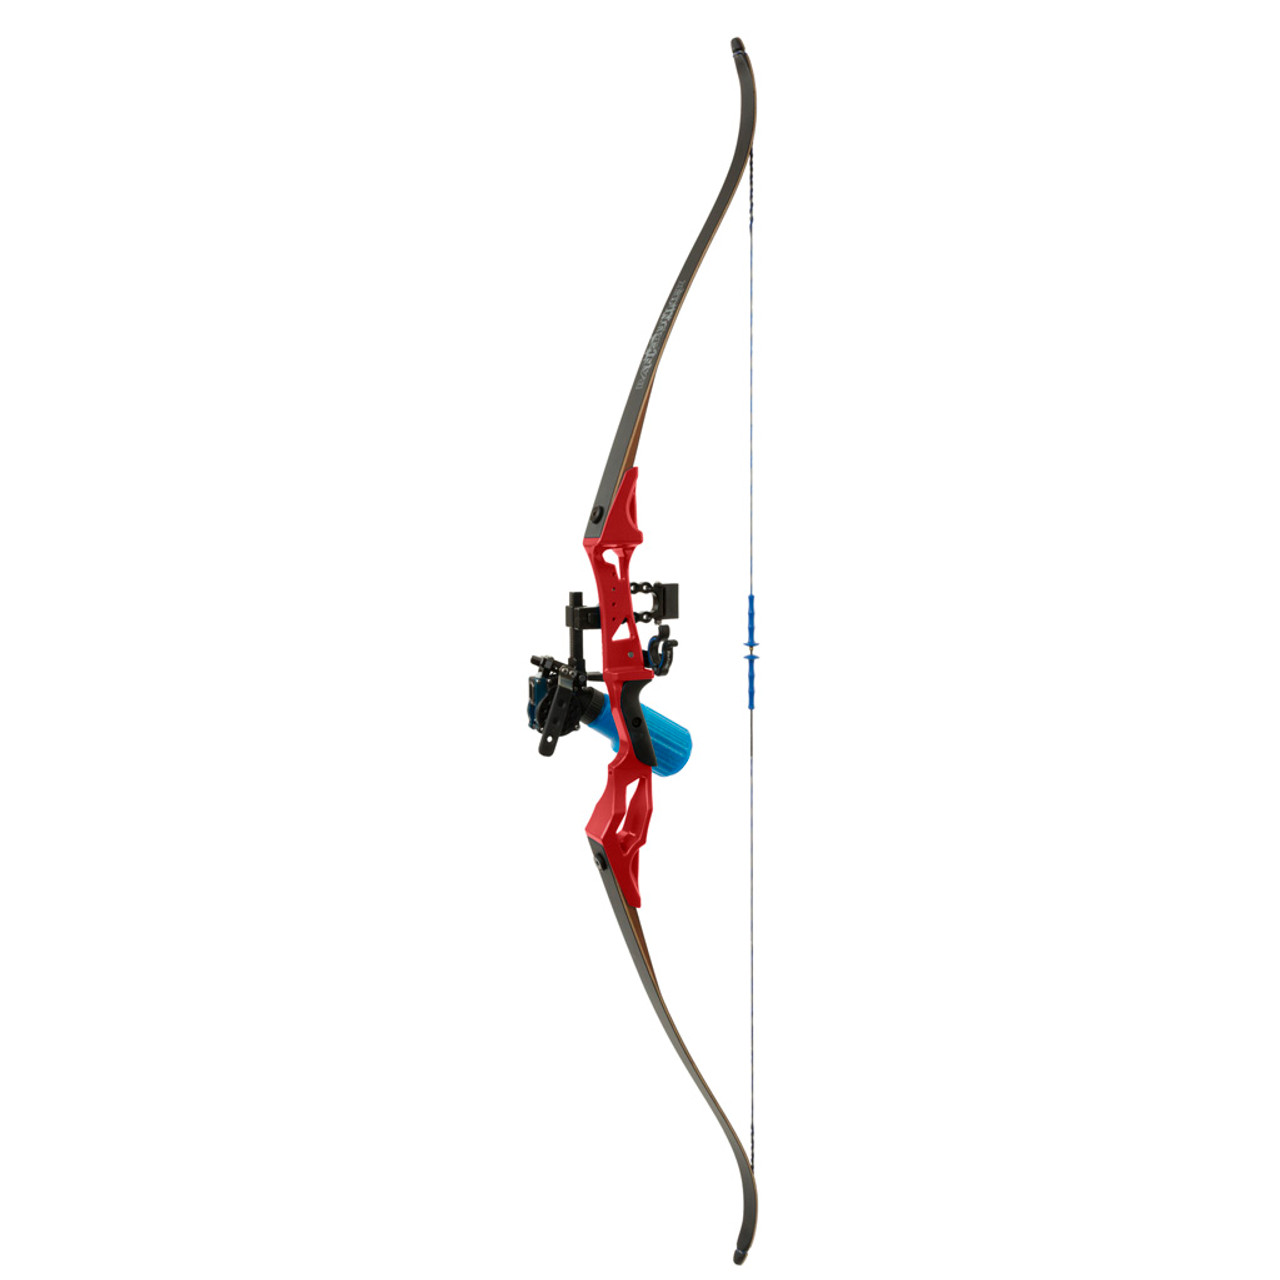 Fin Finder Bank Runner Bowfishing Recurve Package W/winch